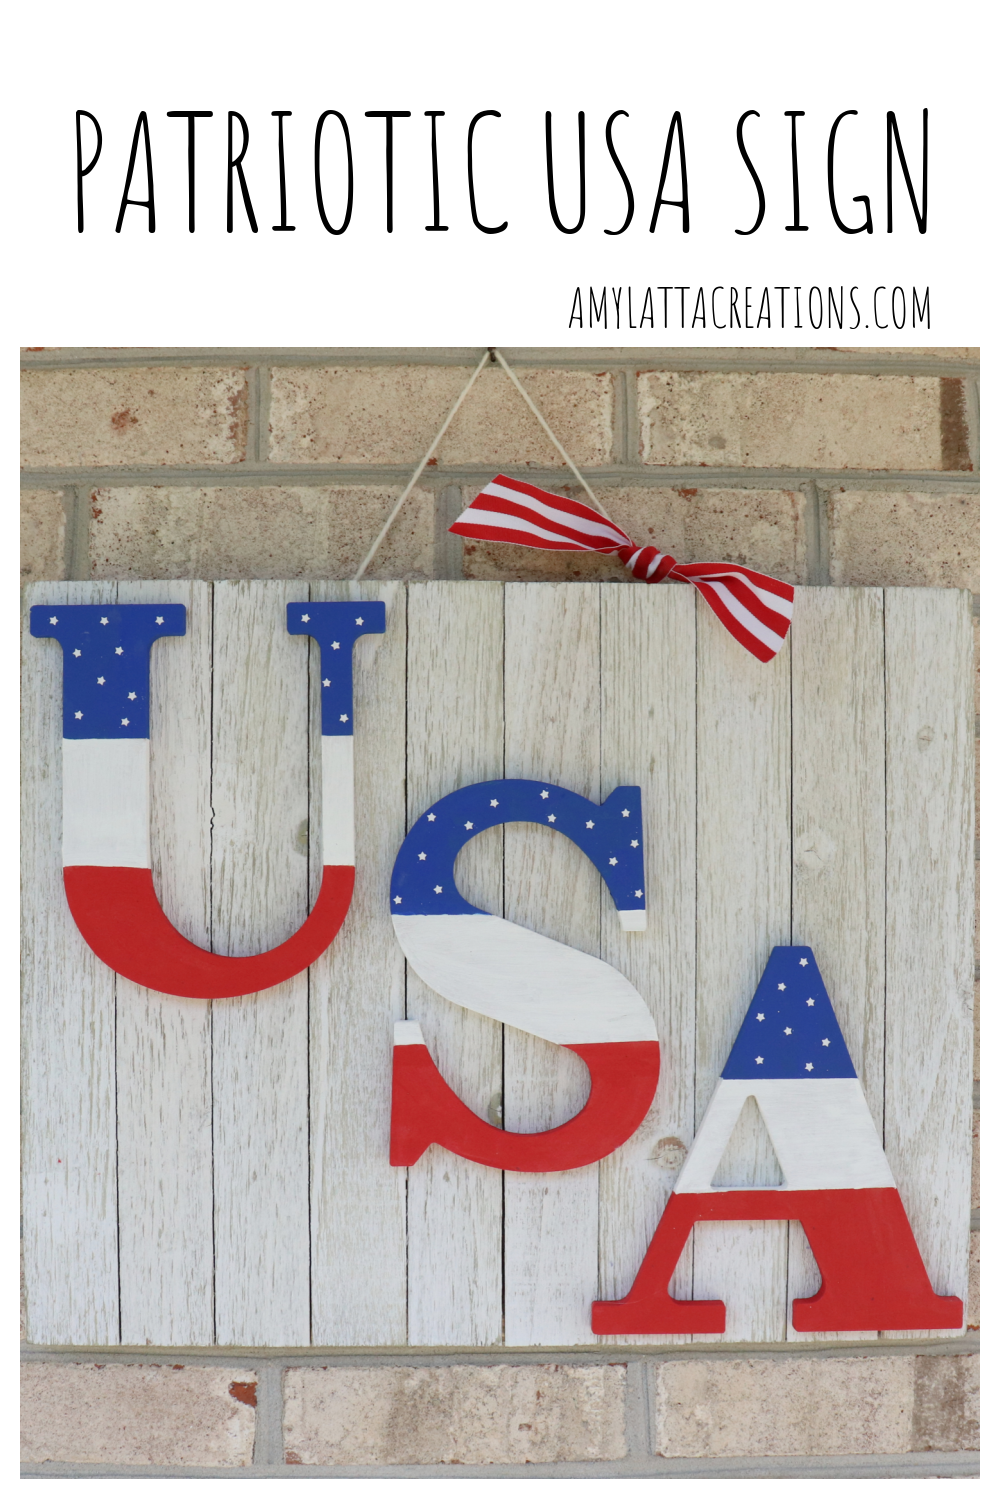 Image contains a white wooden sign with the letters "USA" painted in red, white, and blue. The sign hangs on a brick background.